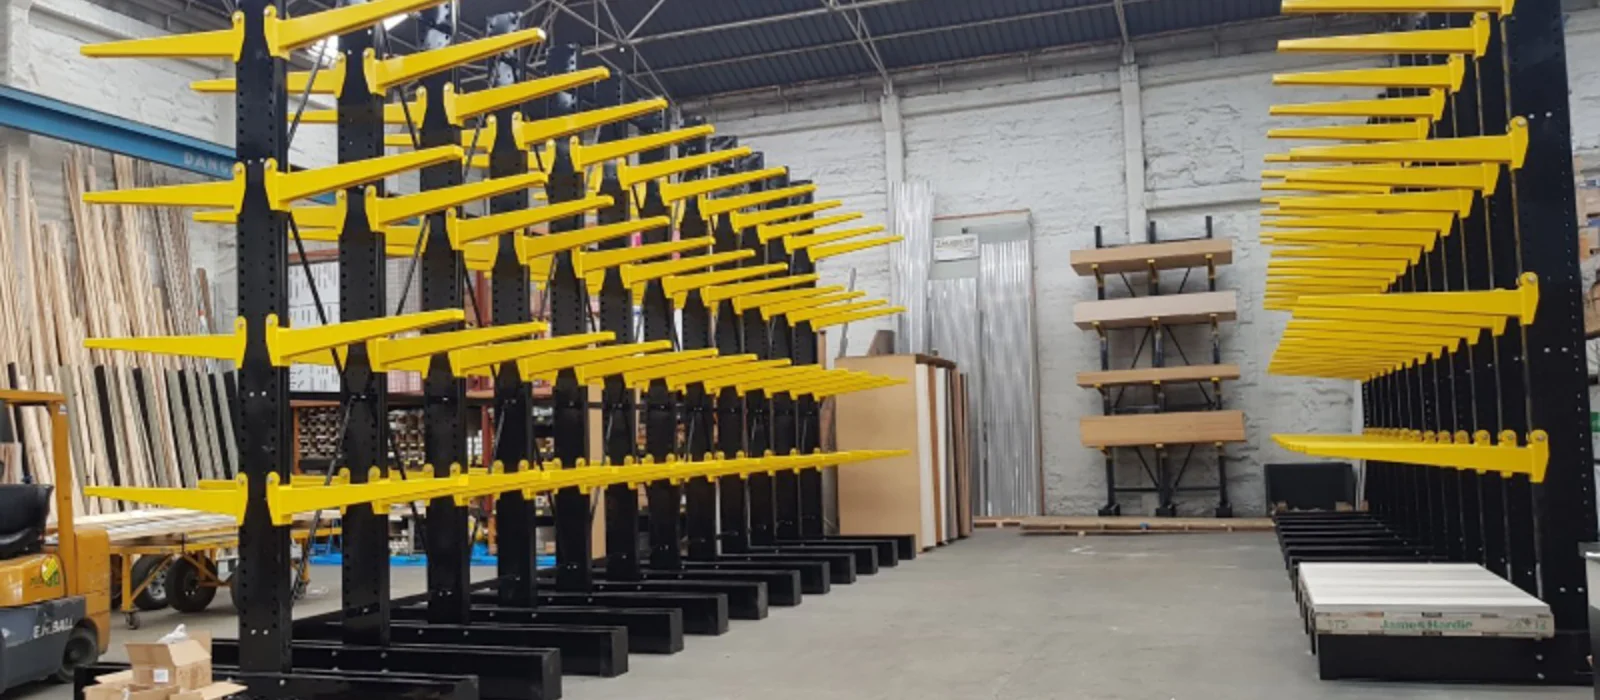 EH Ball iTM, Cantilever Racking, Pallet Racking